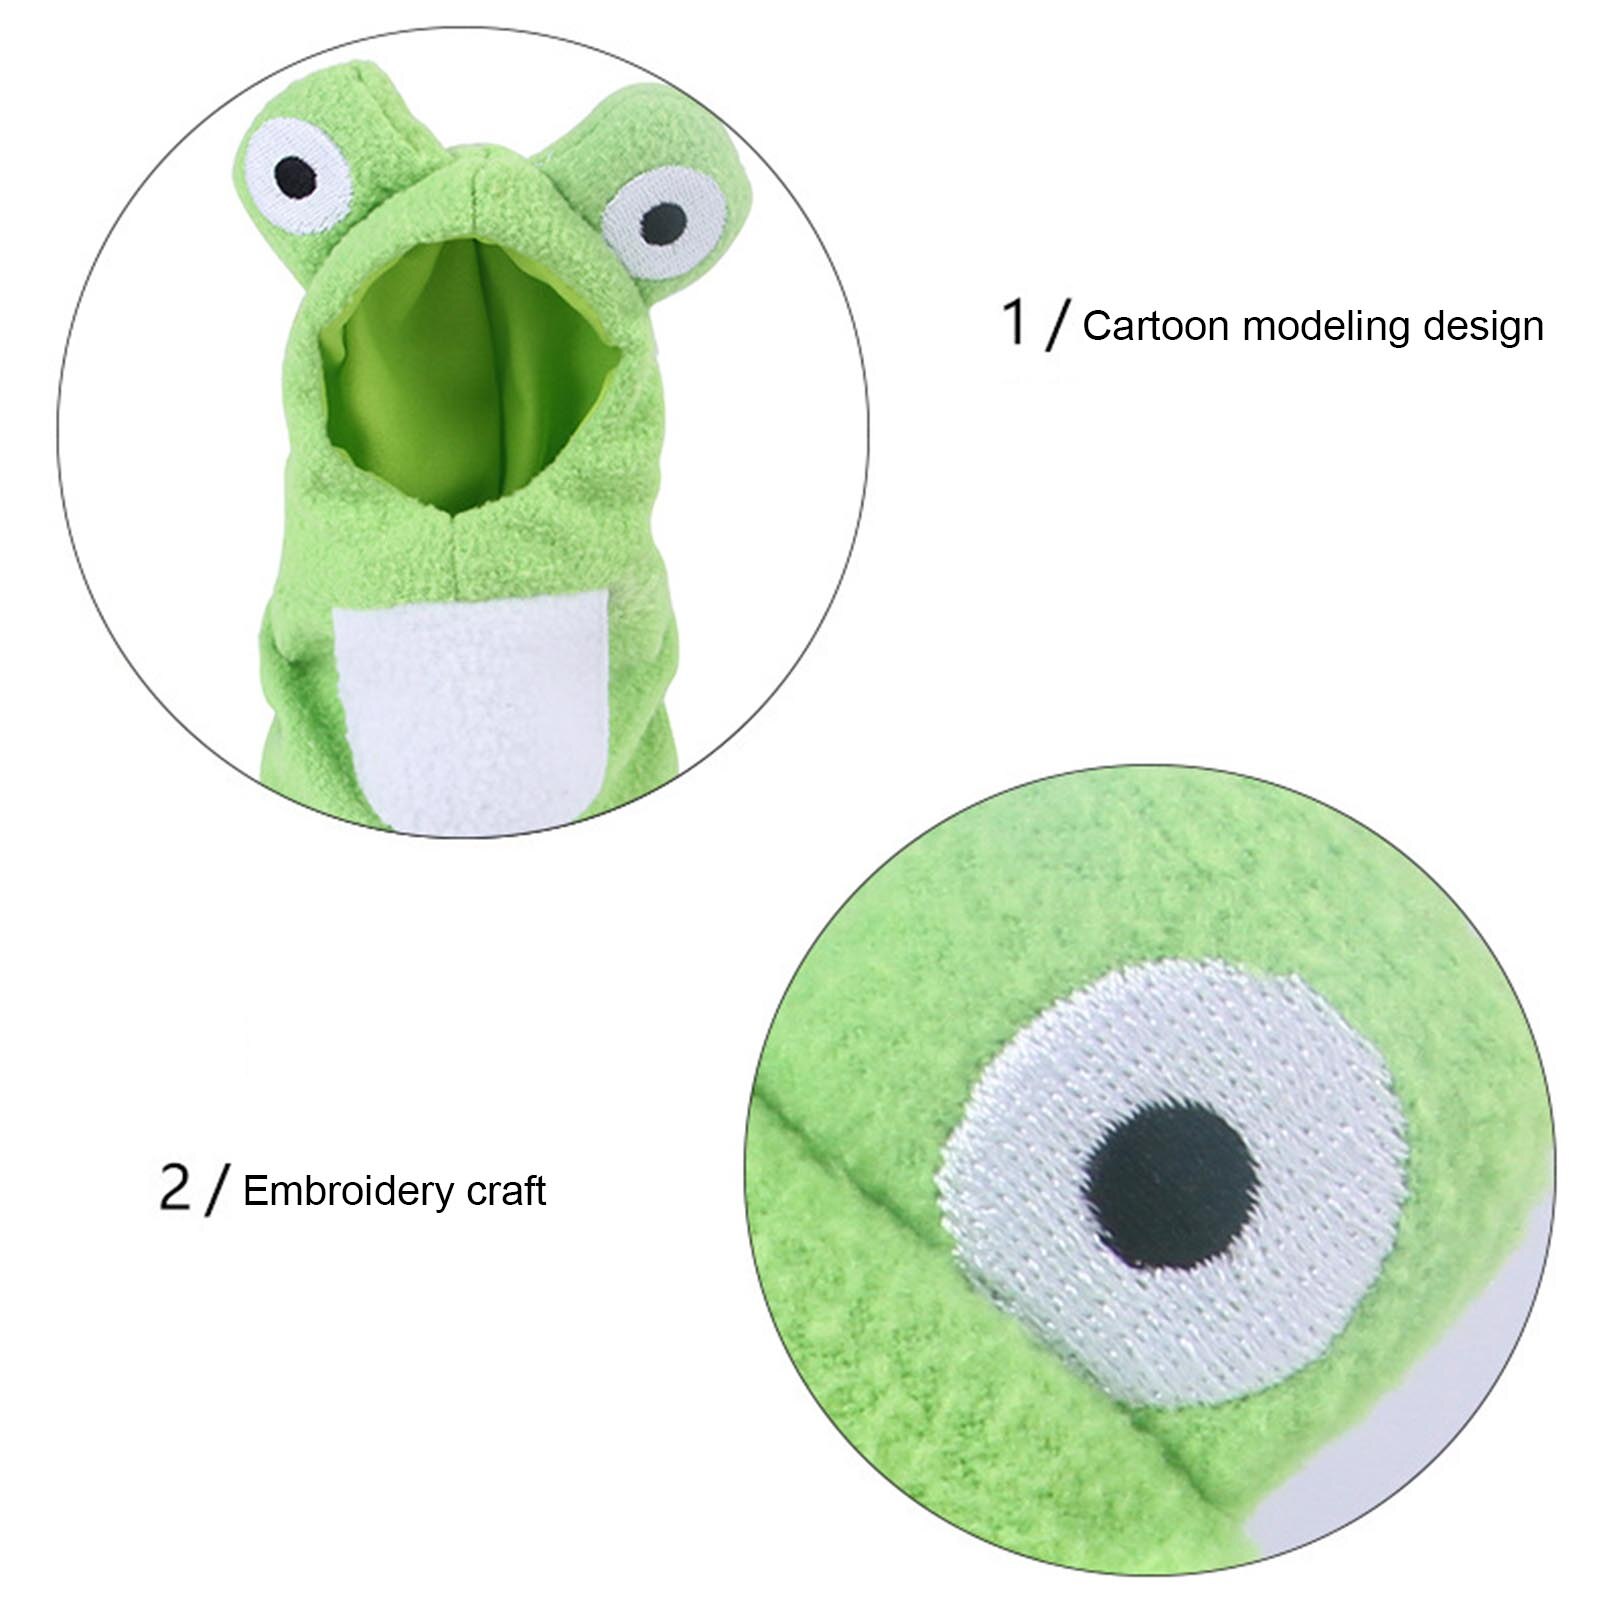 Bird's Hooded Winter Clothes Warm Hooded Coat Suit Frog Shape Cute Pet Parrot Outfit Winter Coat Warm Cozy Hooded Bird Clothes